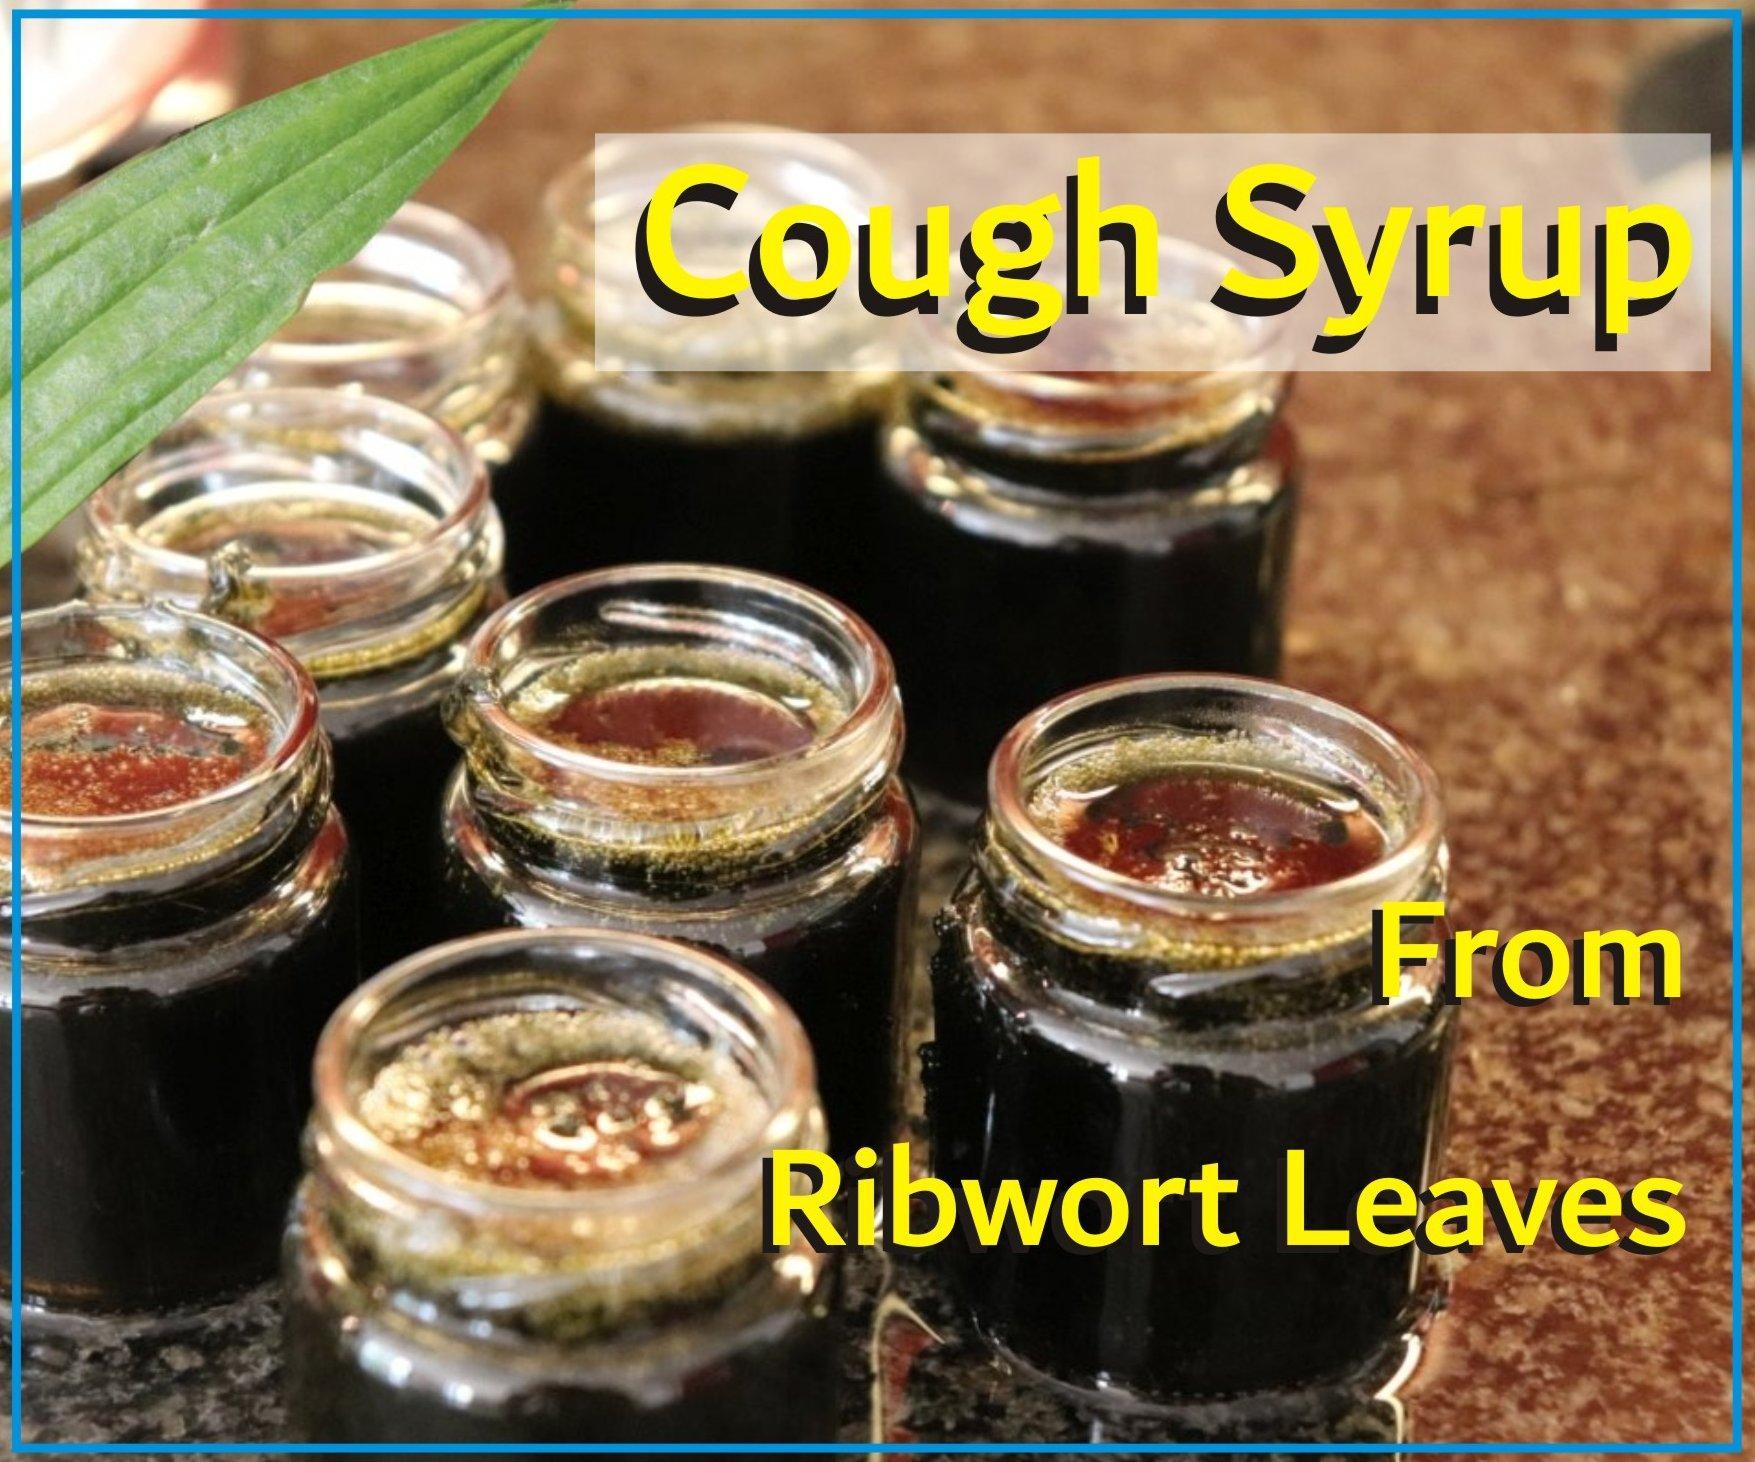 Cough Syrup From Ribwort Leaves